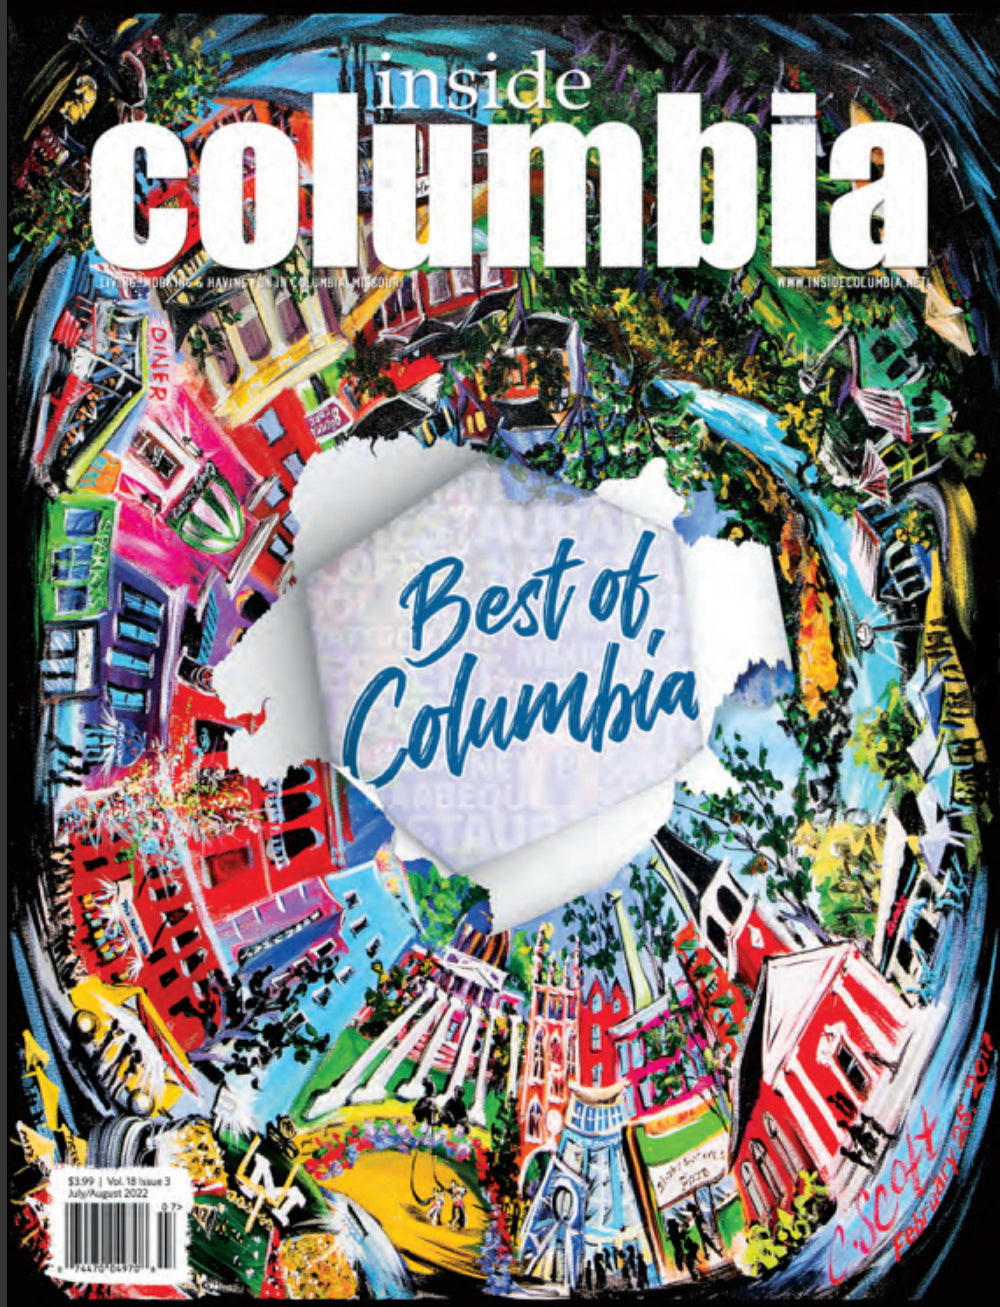 AroundTown Columbia, 12x12 color print, featured on the cover of Inside Columbia magazine